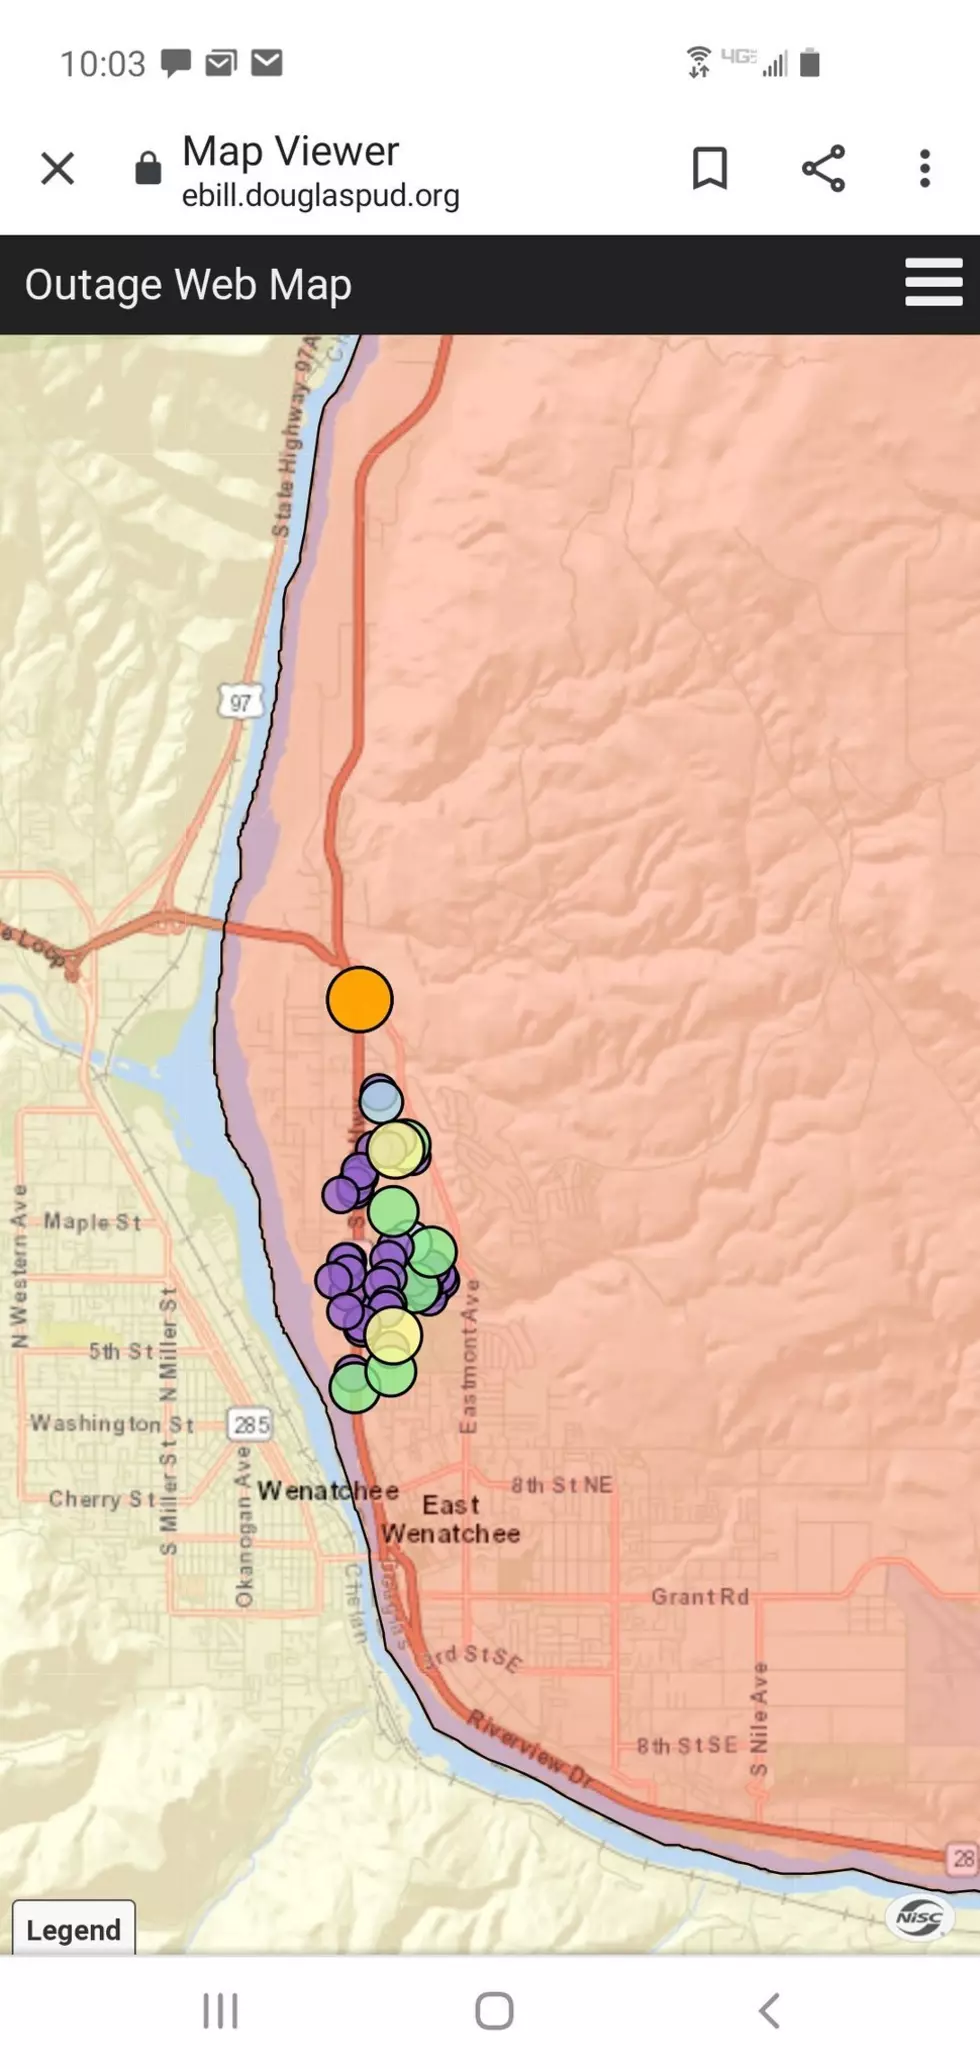 Squirrel Causes Saturday Power Outage in East Wenatchee